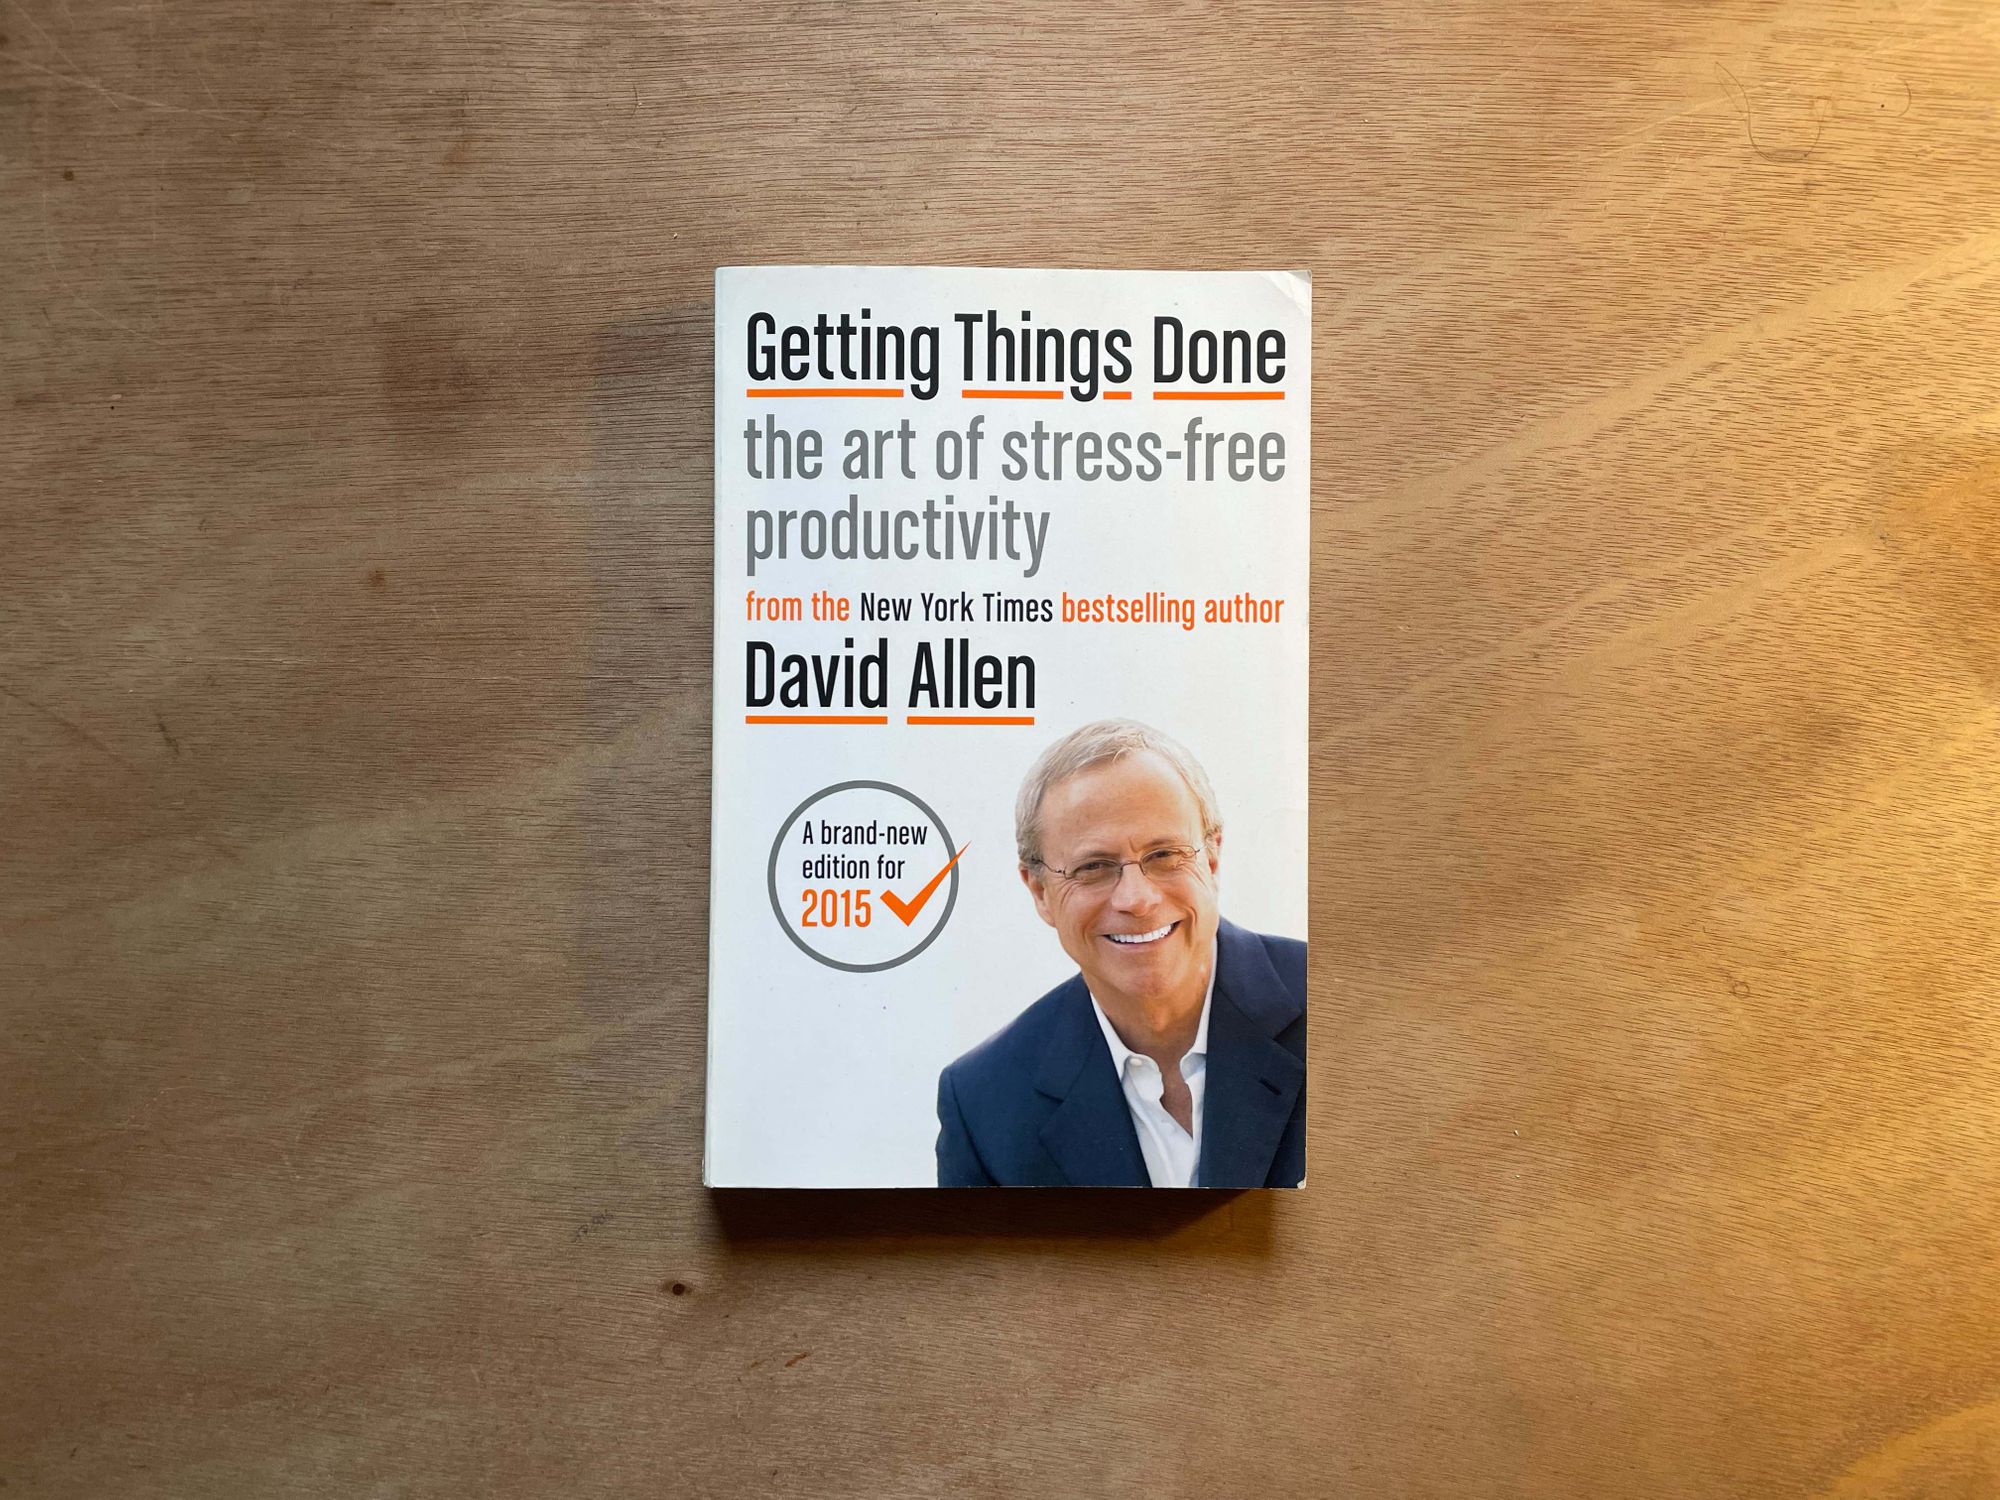 Getting Things Done teaches the art of stress-free productivity